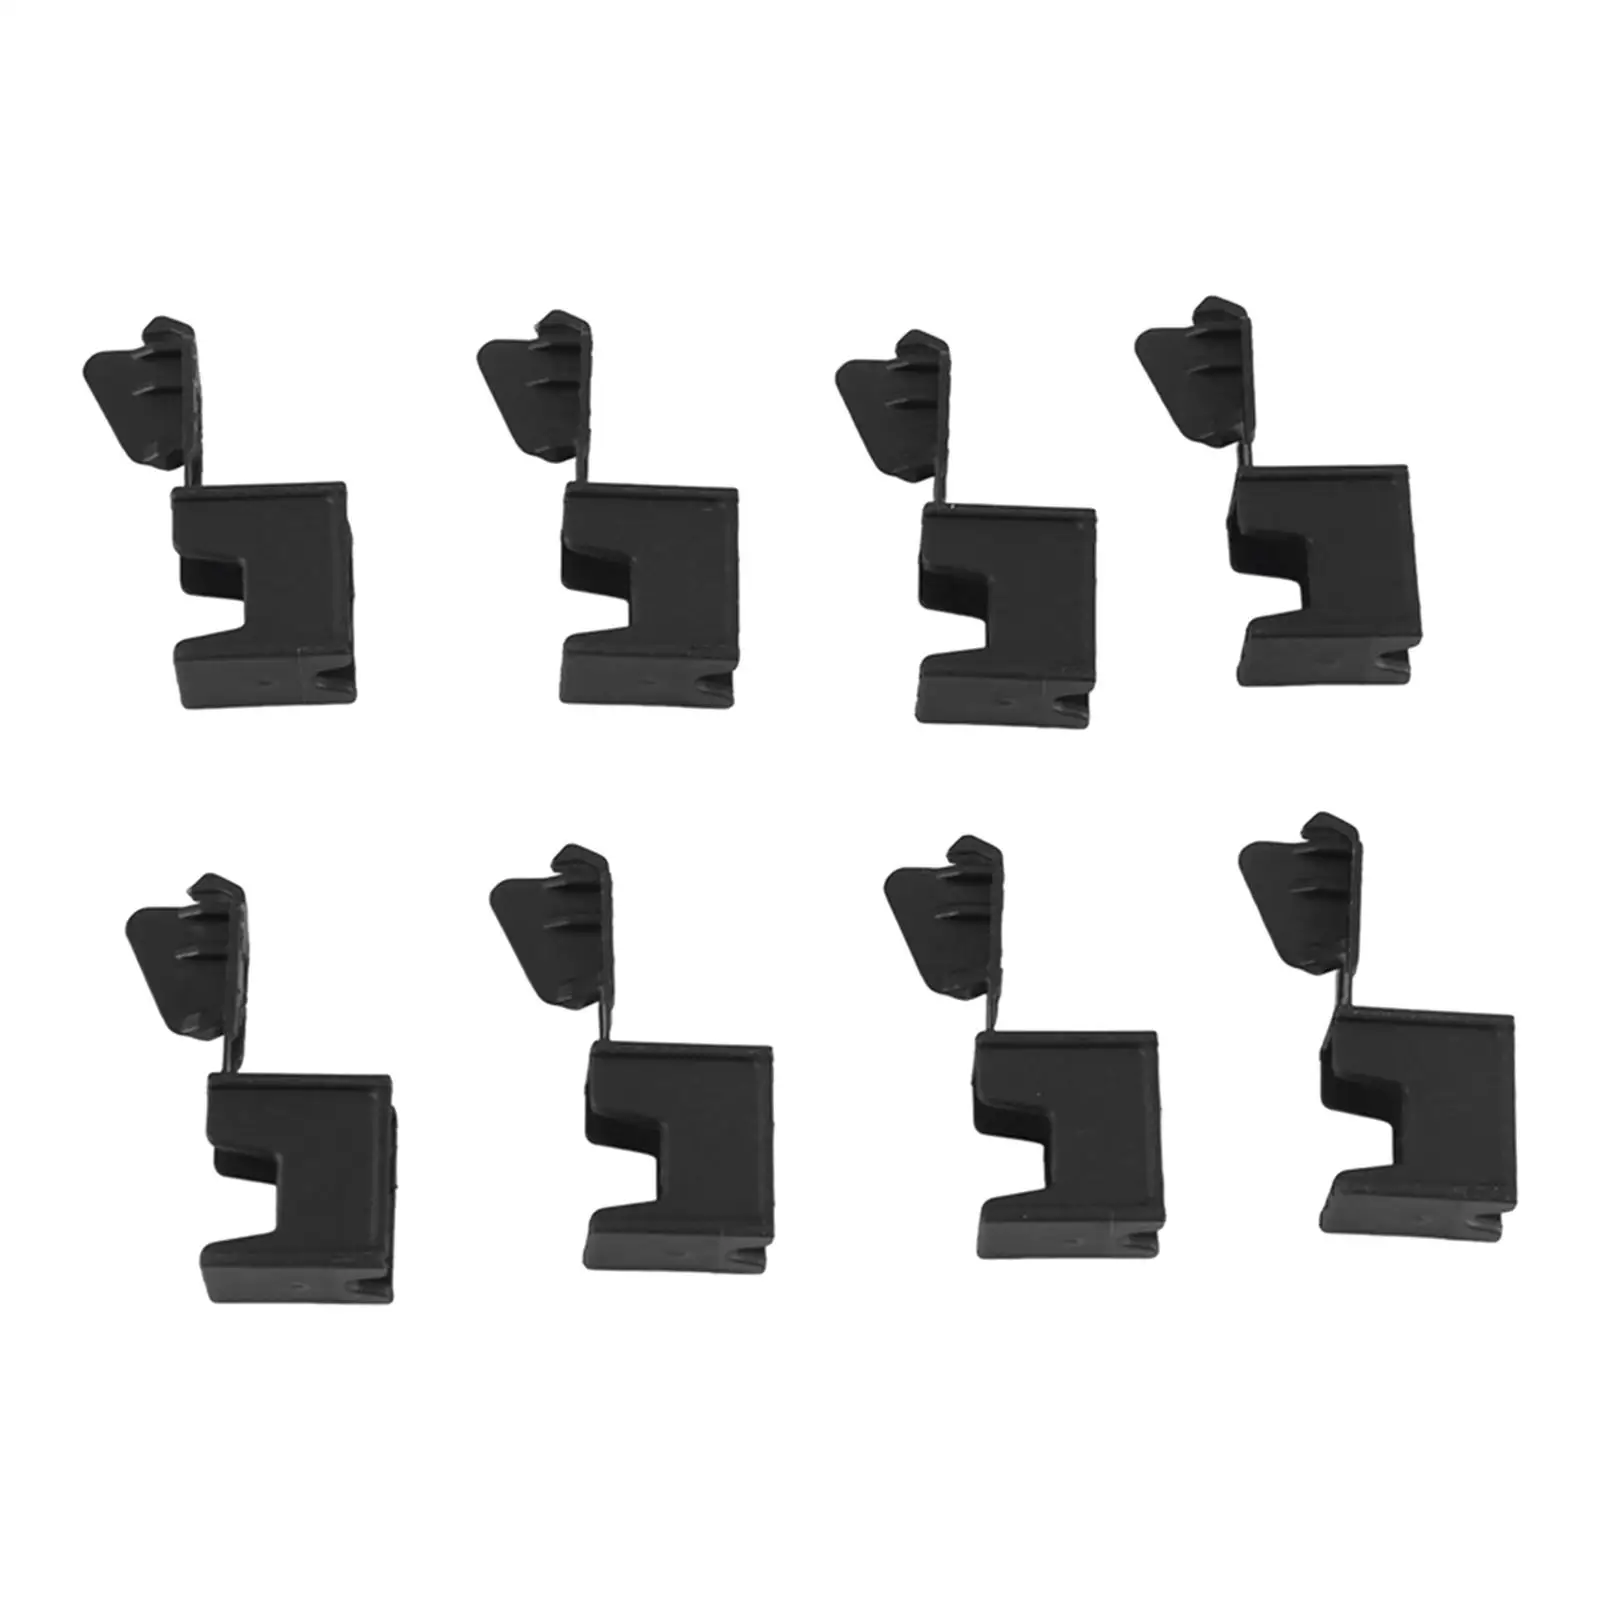 8Pcs Convertible Roof Top Hinge Cover Clips 54377187747 Car Sturdy Easy to Install Direct Replaces Supplies for BMW E93 F33